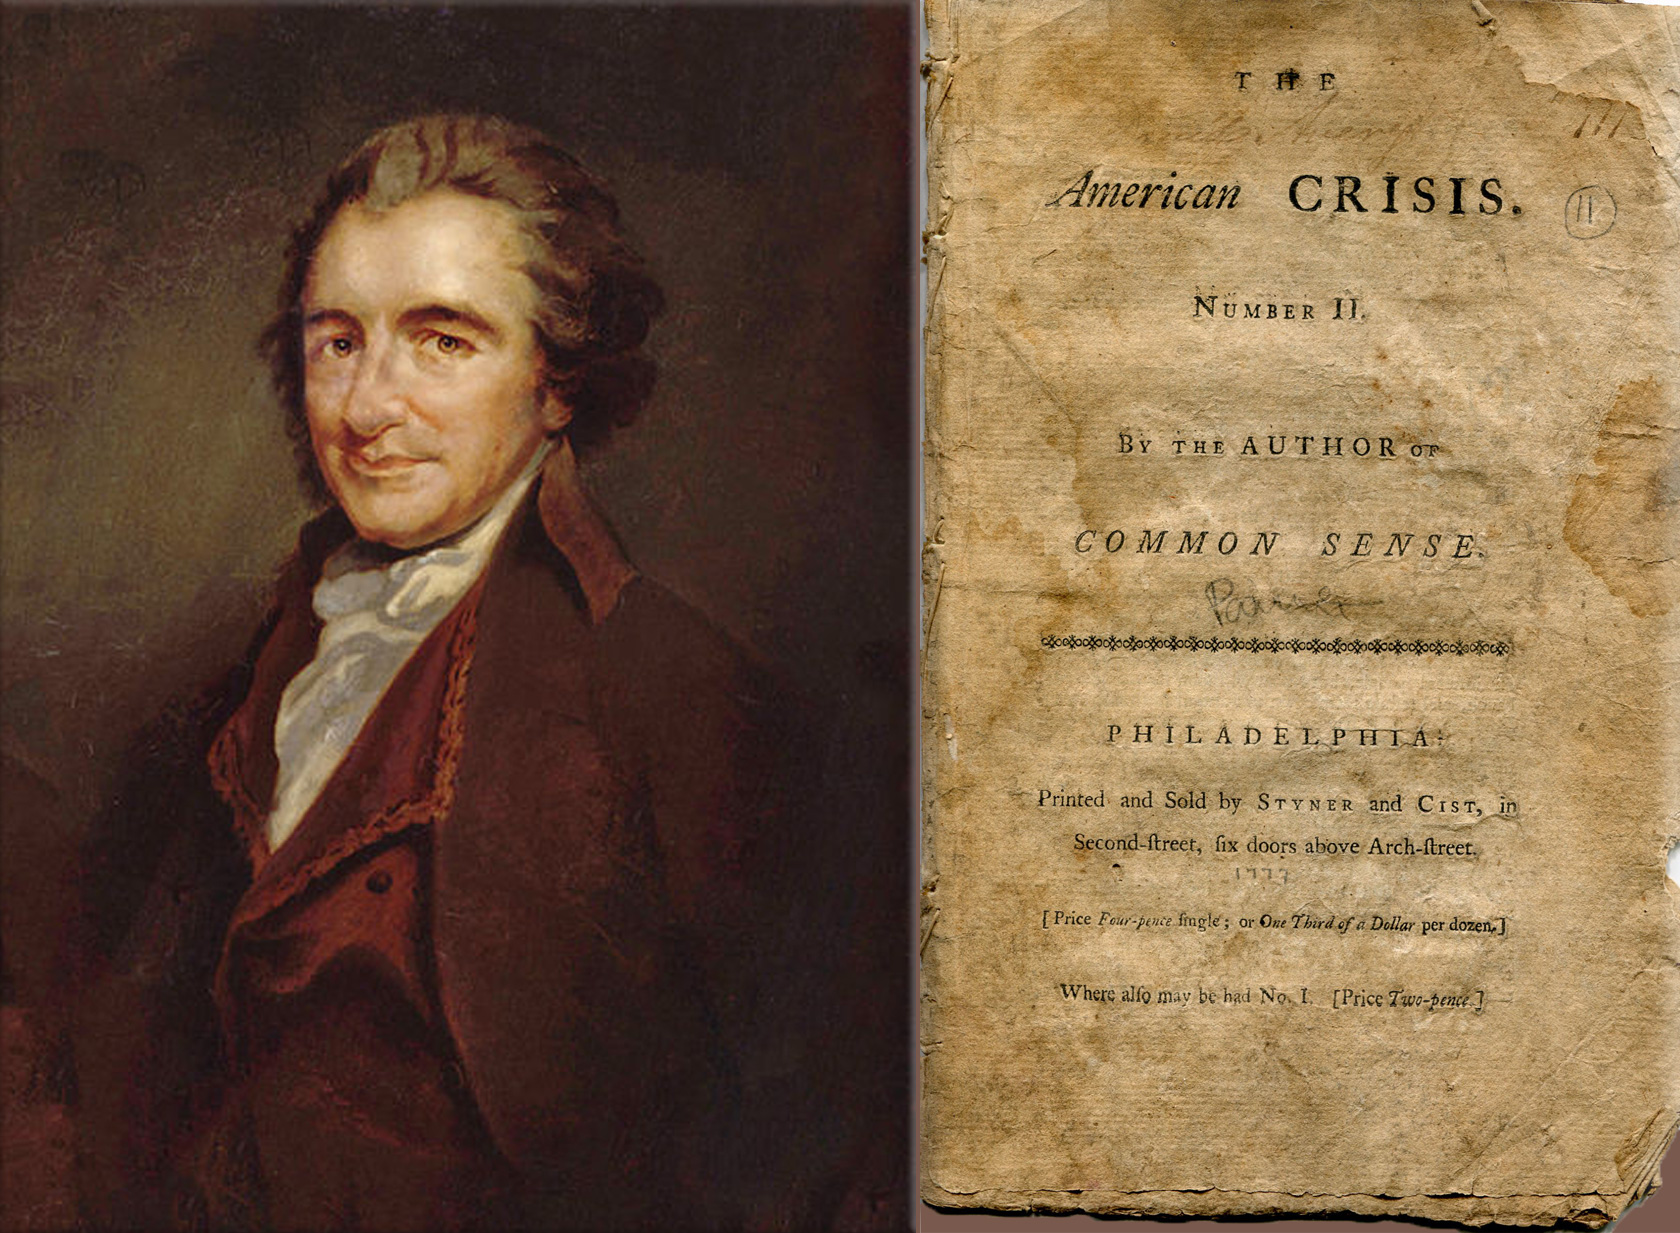 Thomas Paine oil painting by Auguste Millière (1880); The American Crisis, a pamphlet series by 18th century Enlightenment philosopher and author Thomas Paine, originally published from 1776 to 1783 during the American Revolution